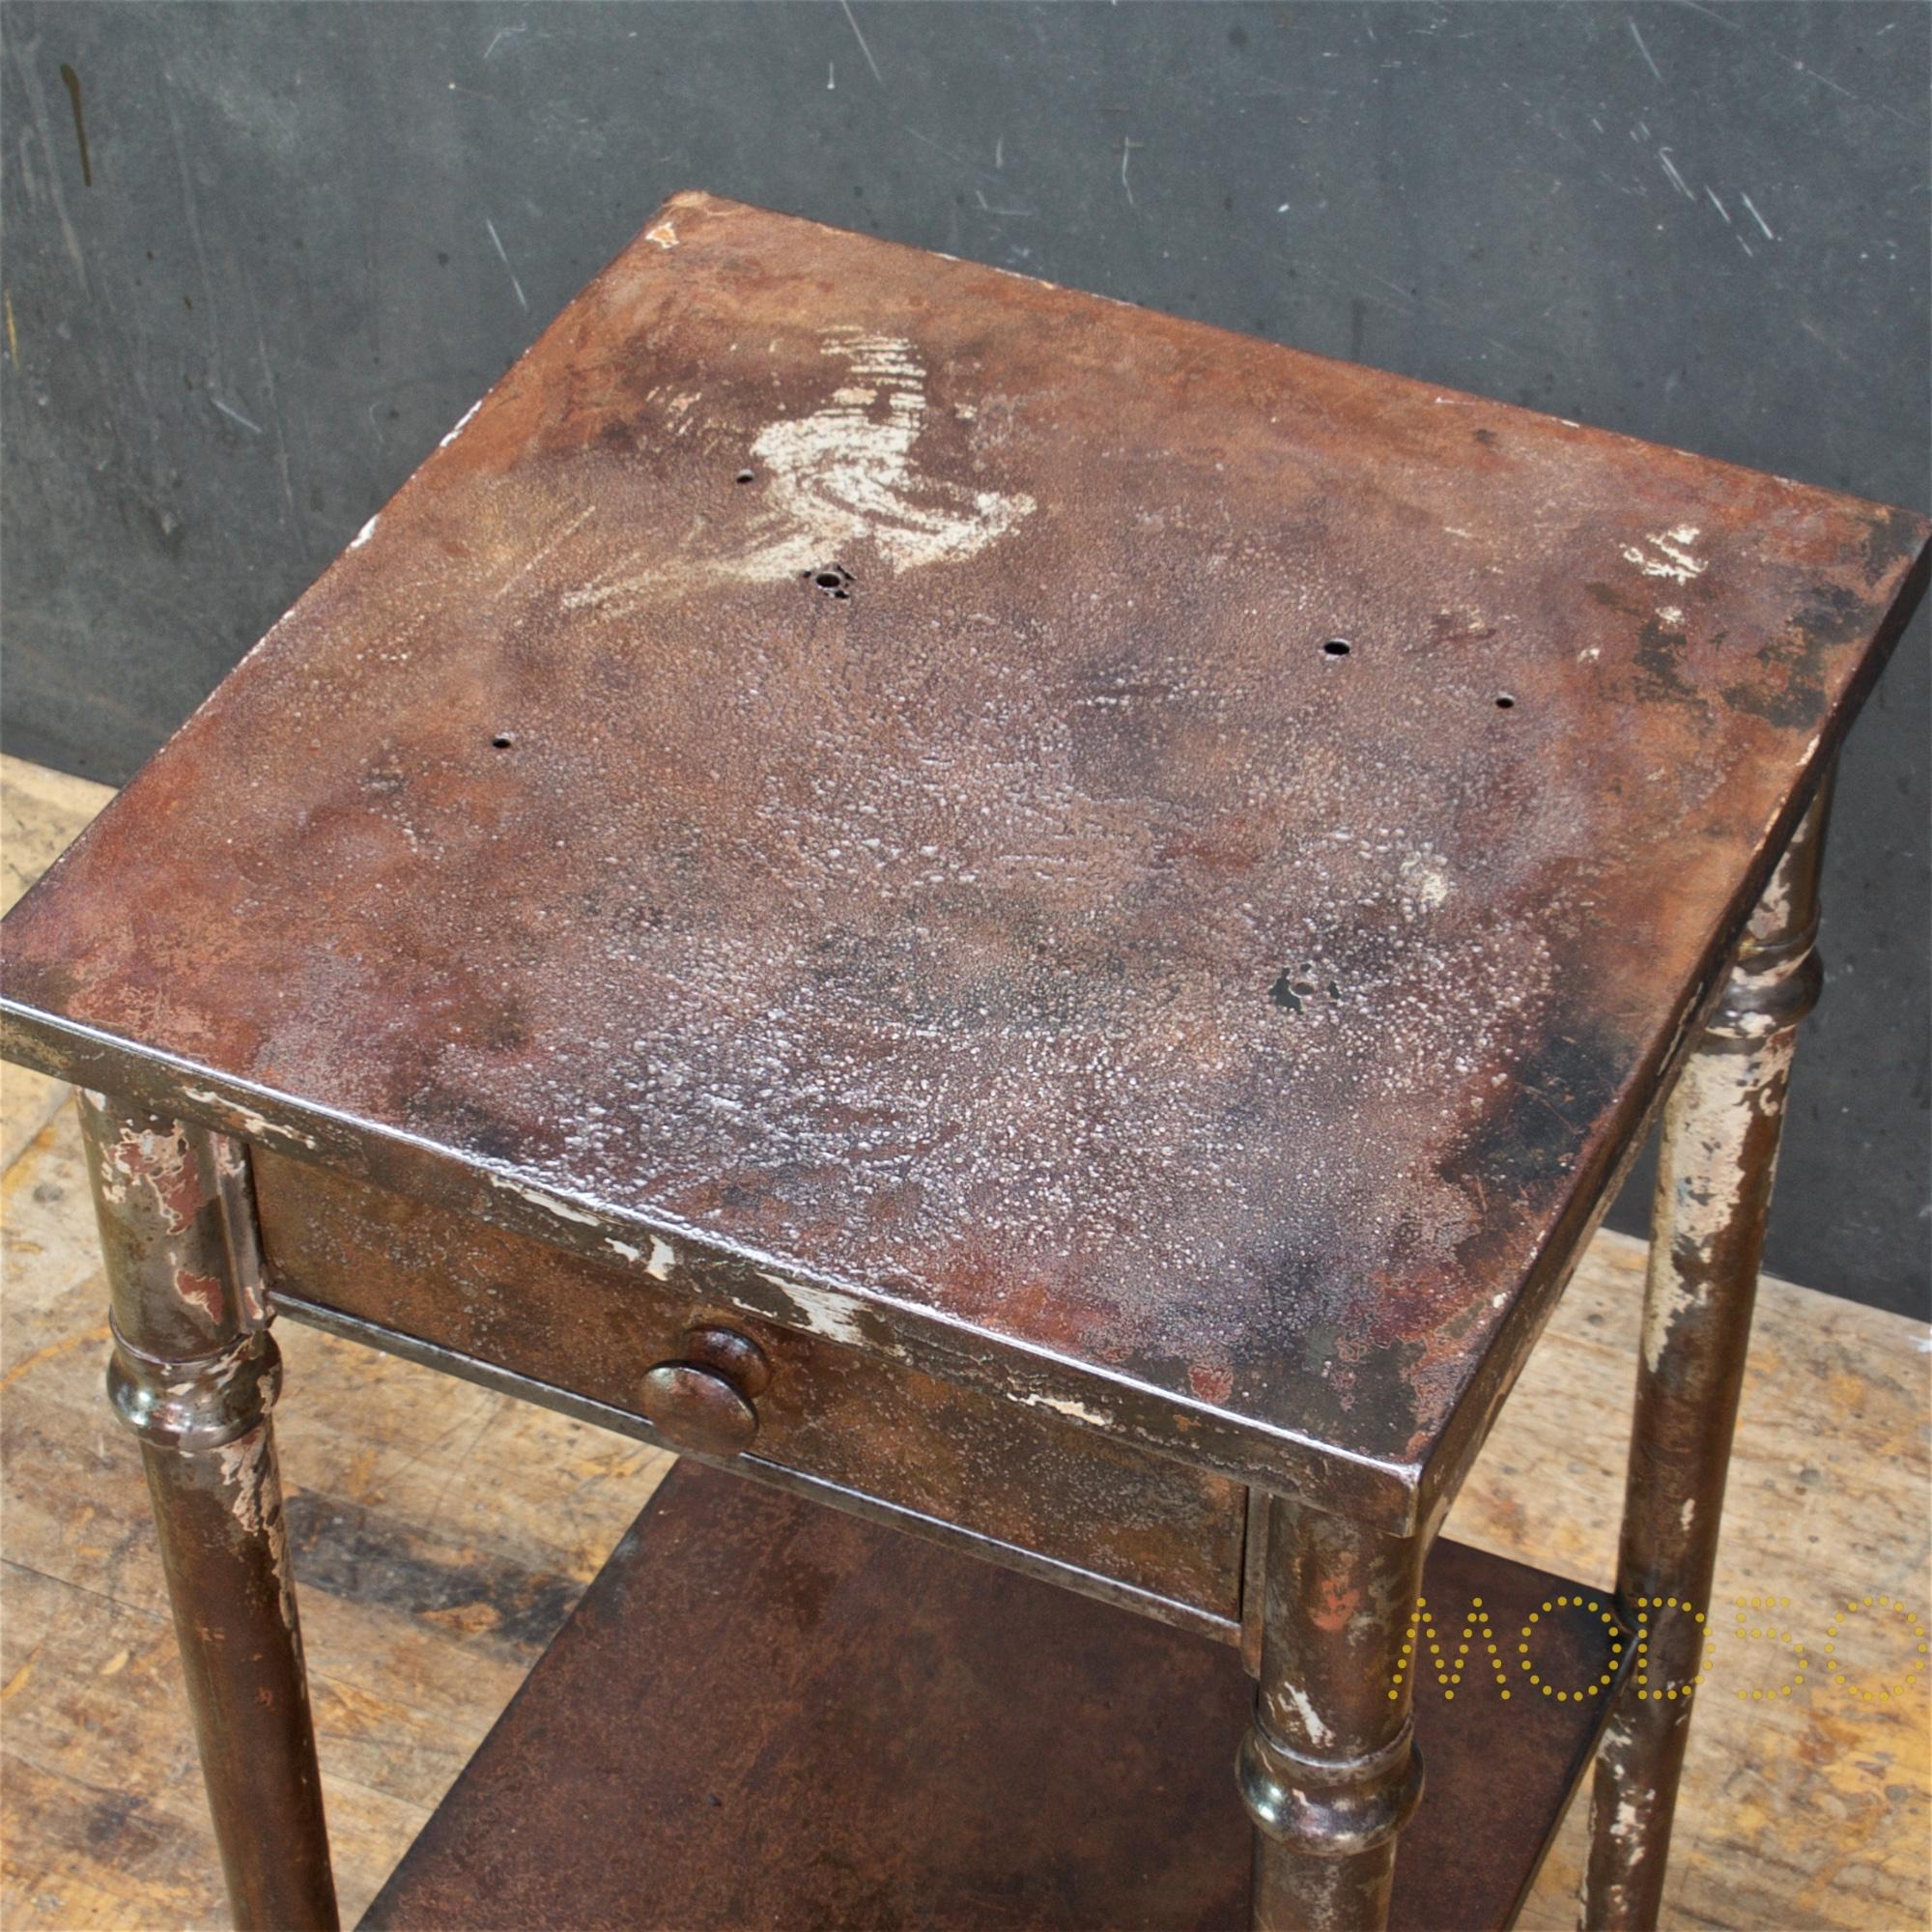 American Old Sea Salvaged Patina Vintage Industrial Metal Tall End Table Petite Simmons